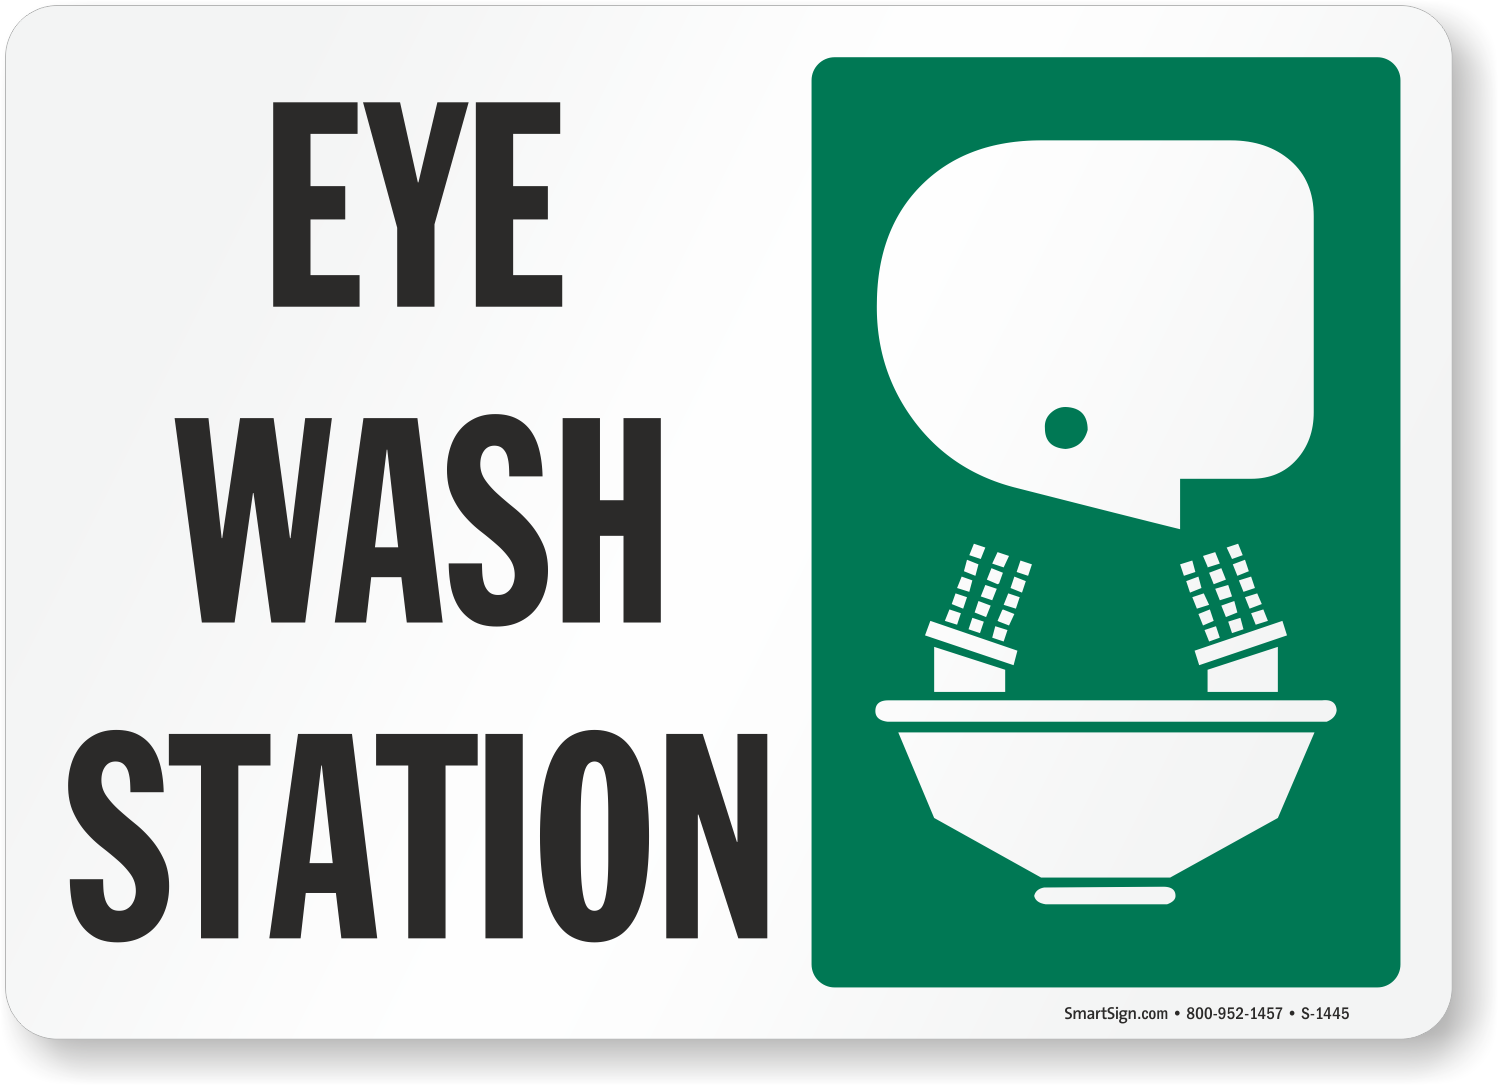 Keep your eyewash station visible. Use a eye wash station sign.  Demonstrate your commitment to safety. - A graphic gets attention and makes  your